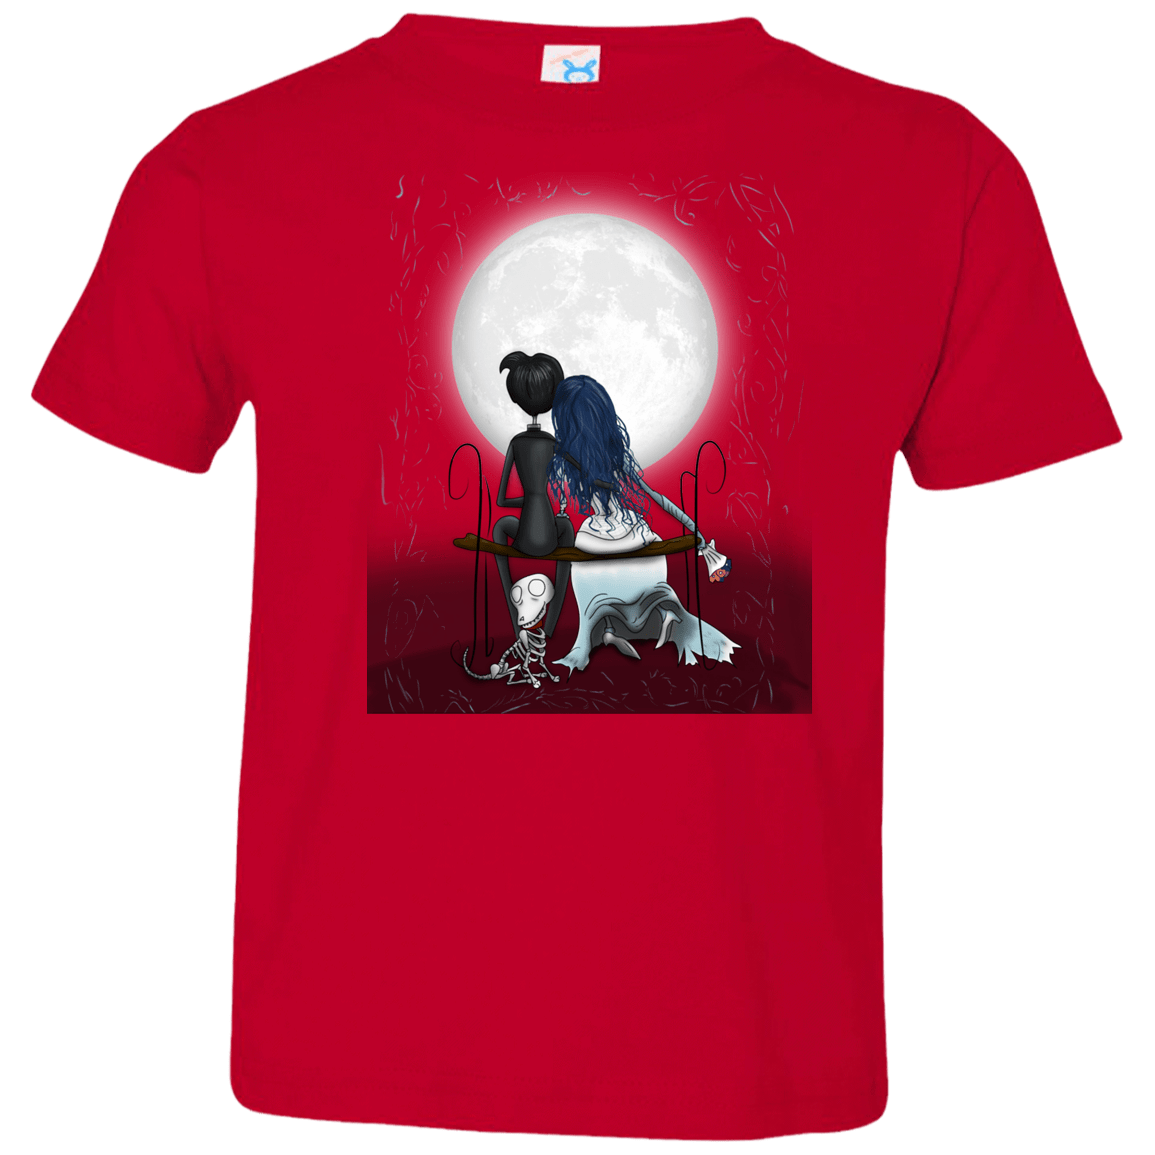 T-Shirts Red / 2T Corpse Bride Love Toddler Premium T-Shirt